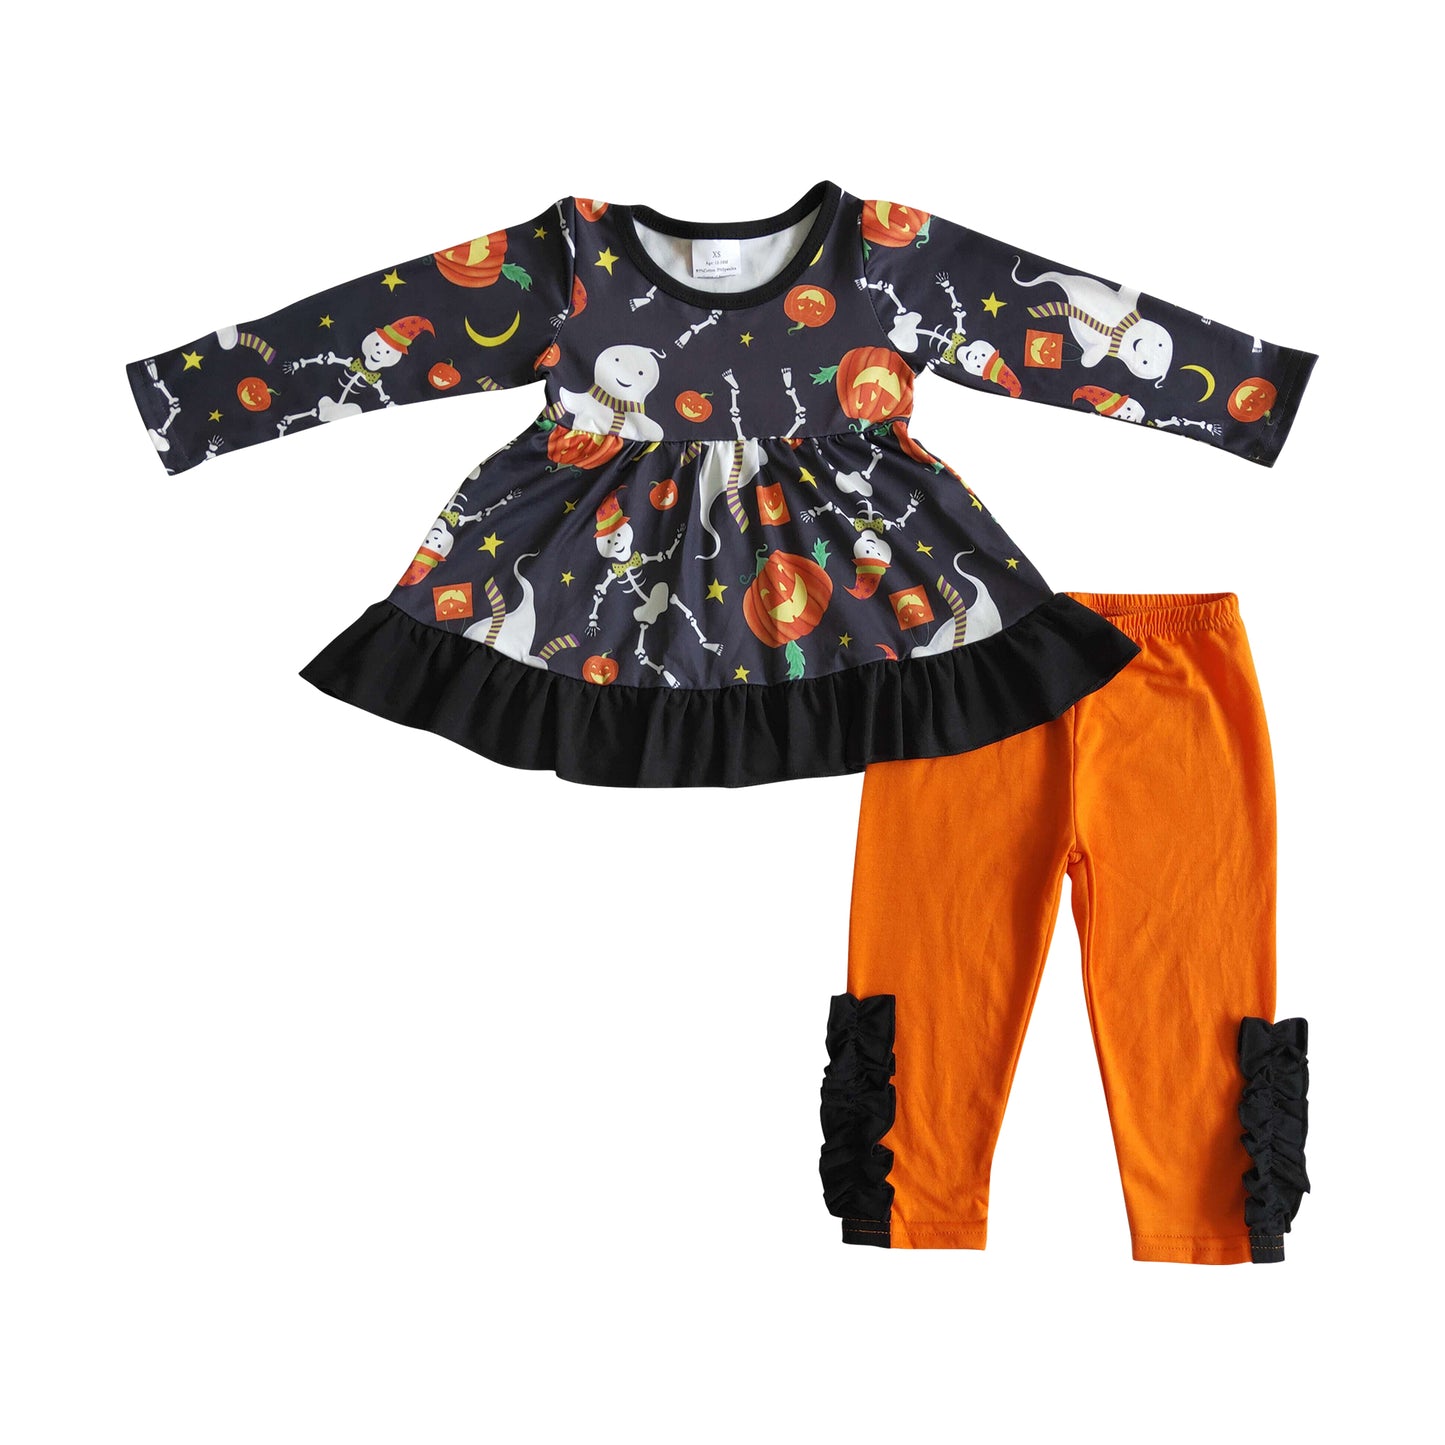 kids clothing outfit for Halloween